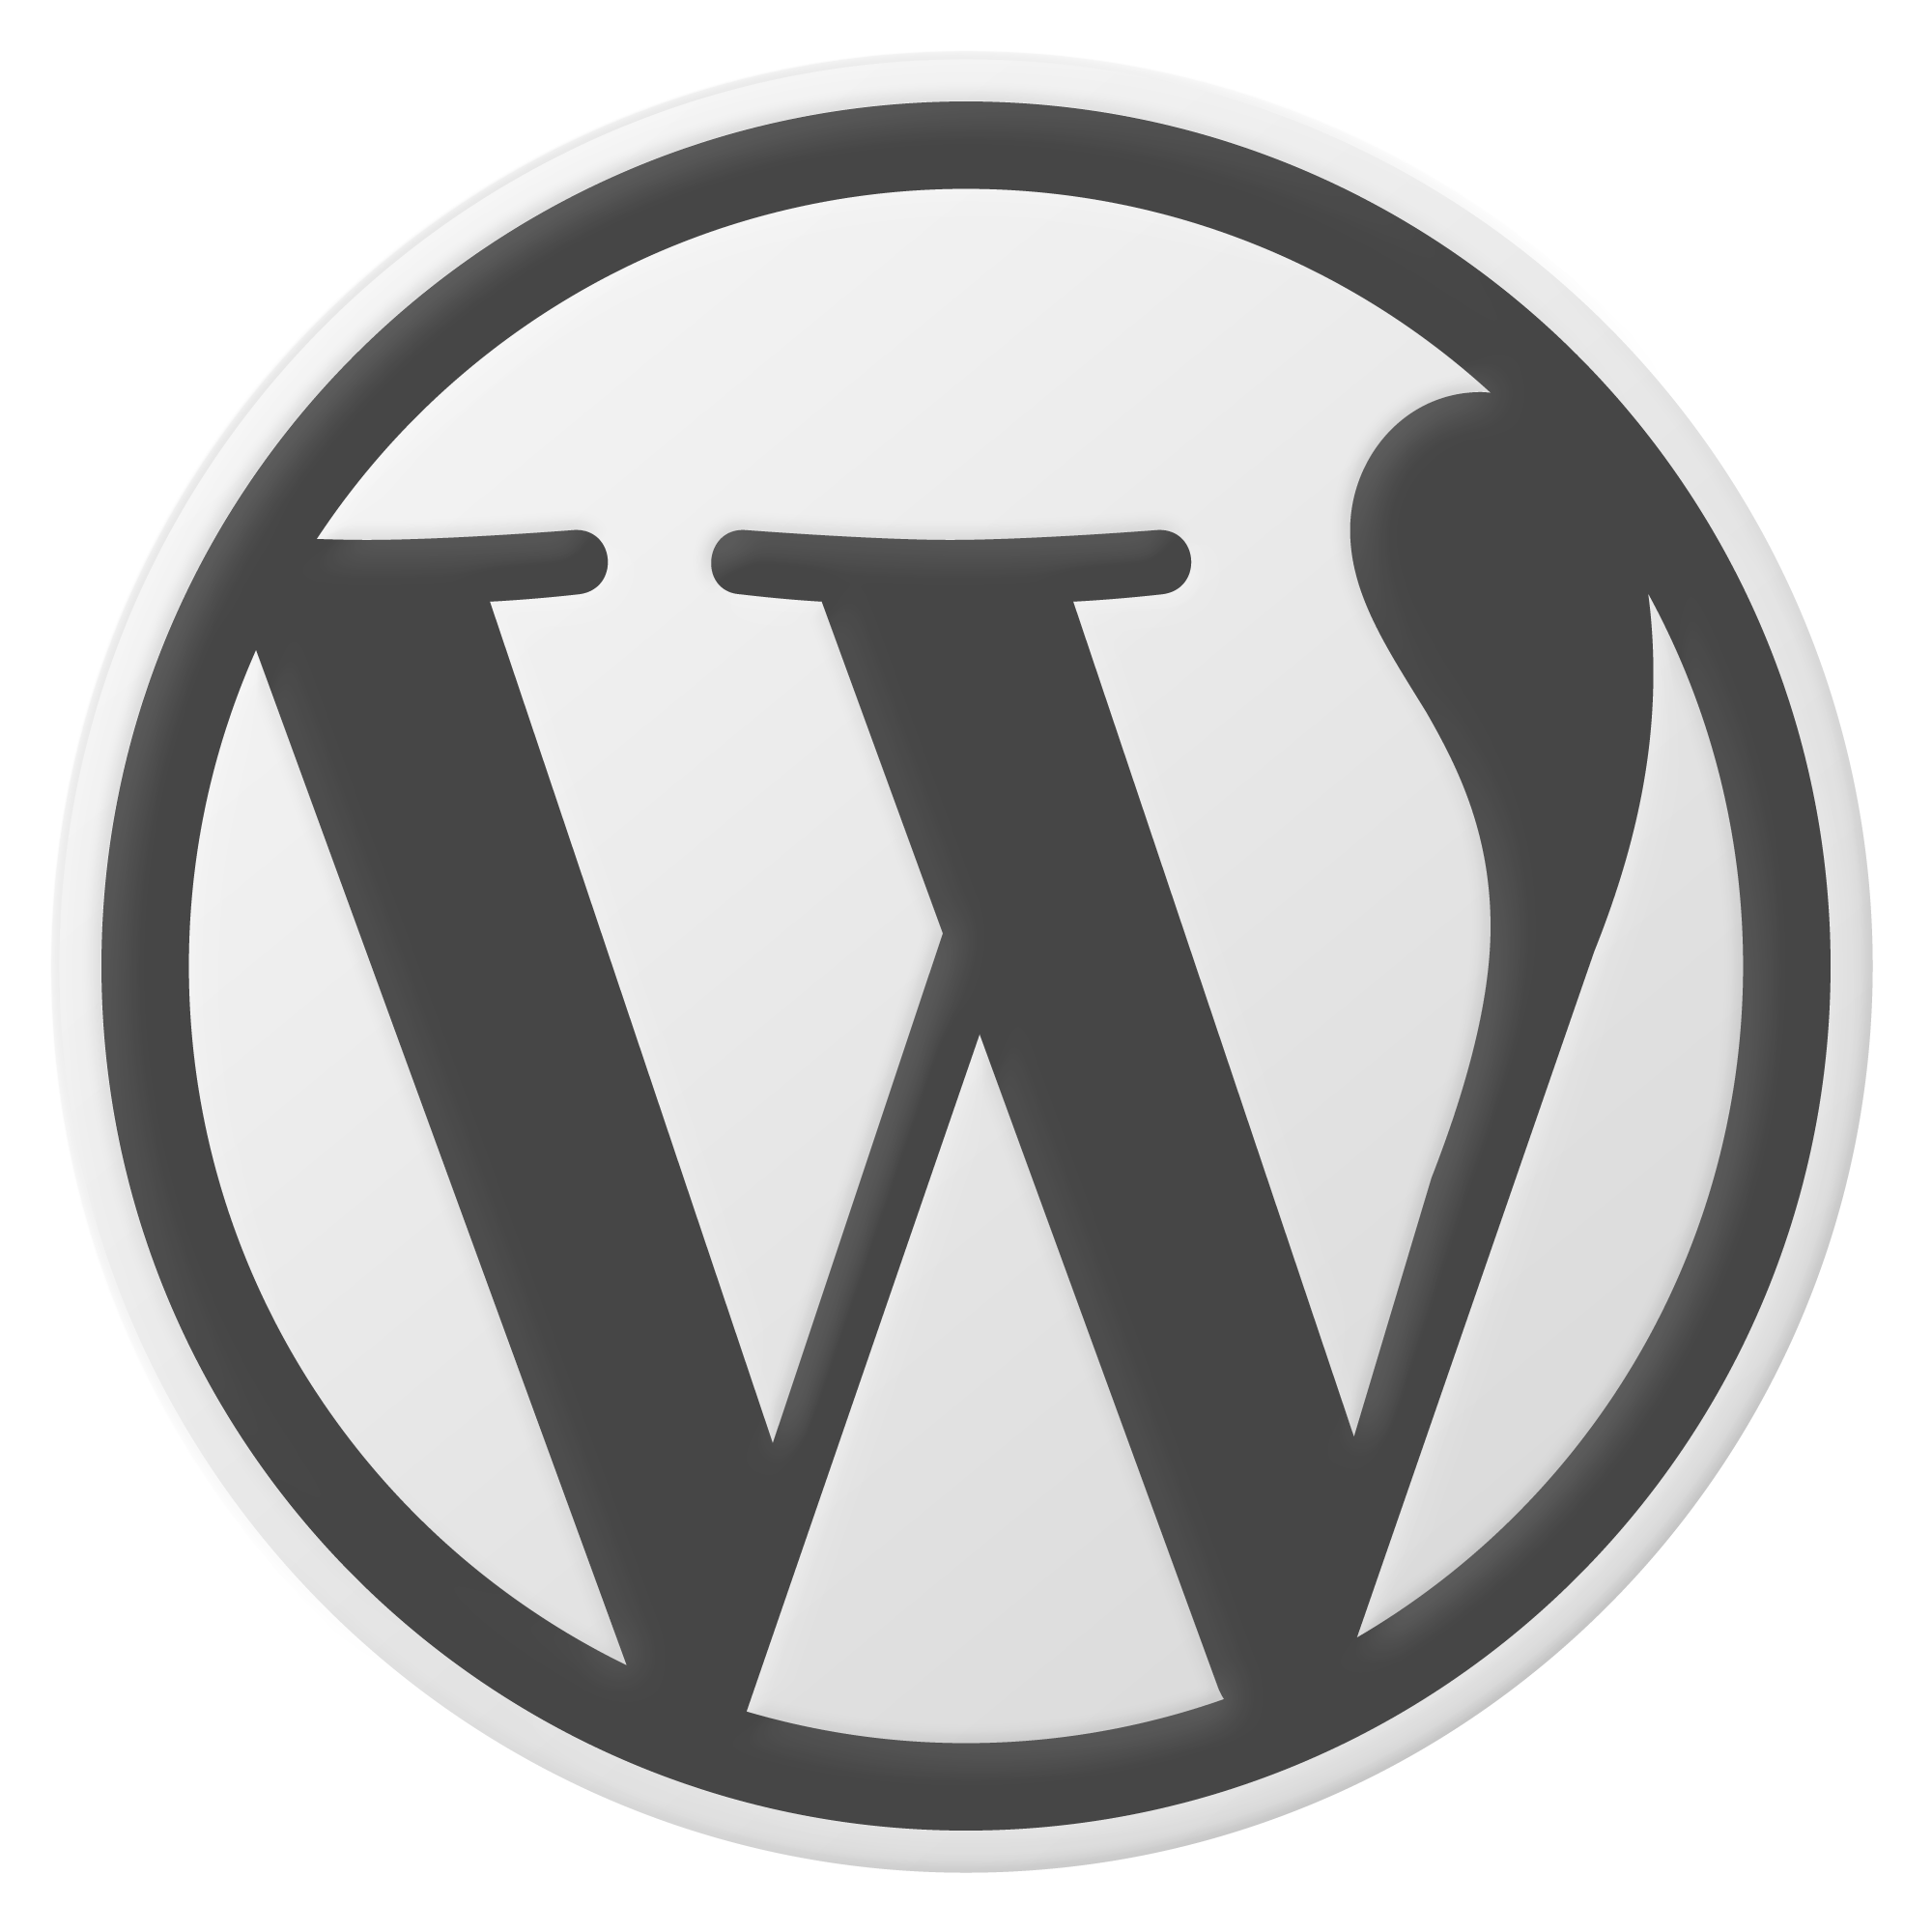 9 Reasons Why WordPress is the Perfect Option for Most Small Business Websites